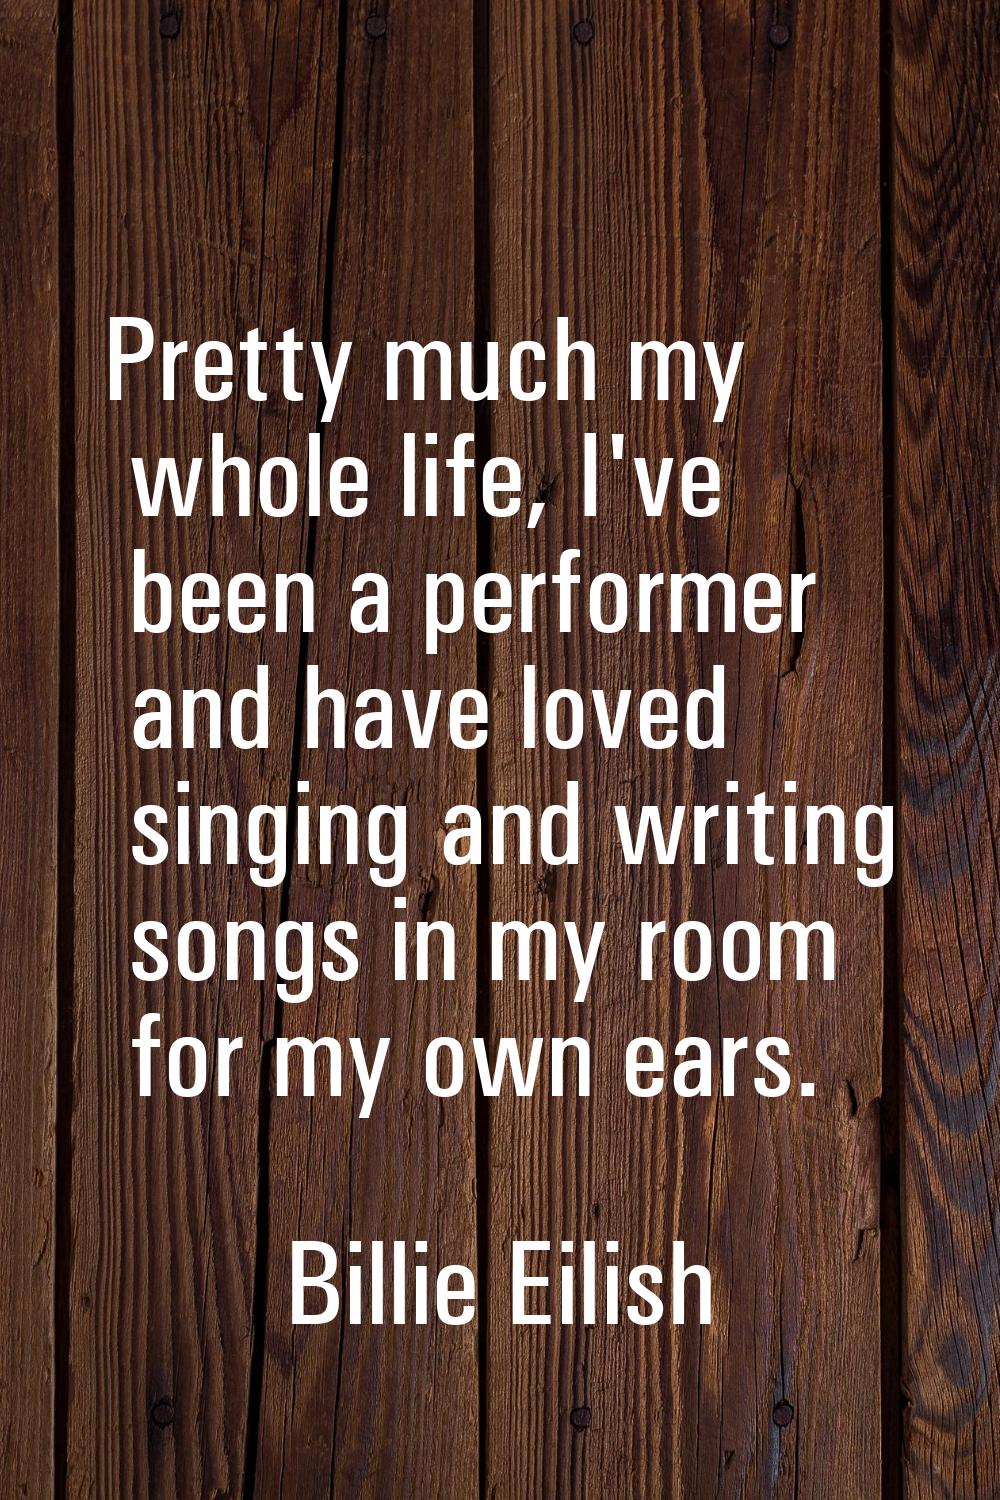 Pretty much my whole life, I've been a performer and have loved singing and writing songs in my roo